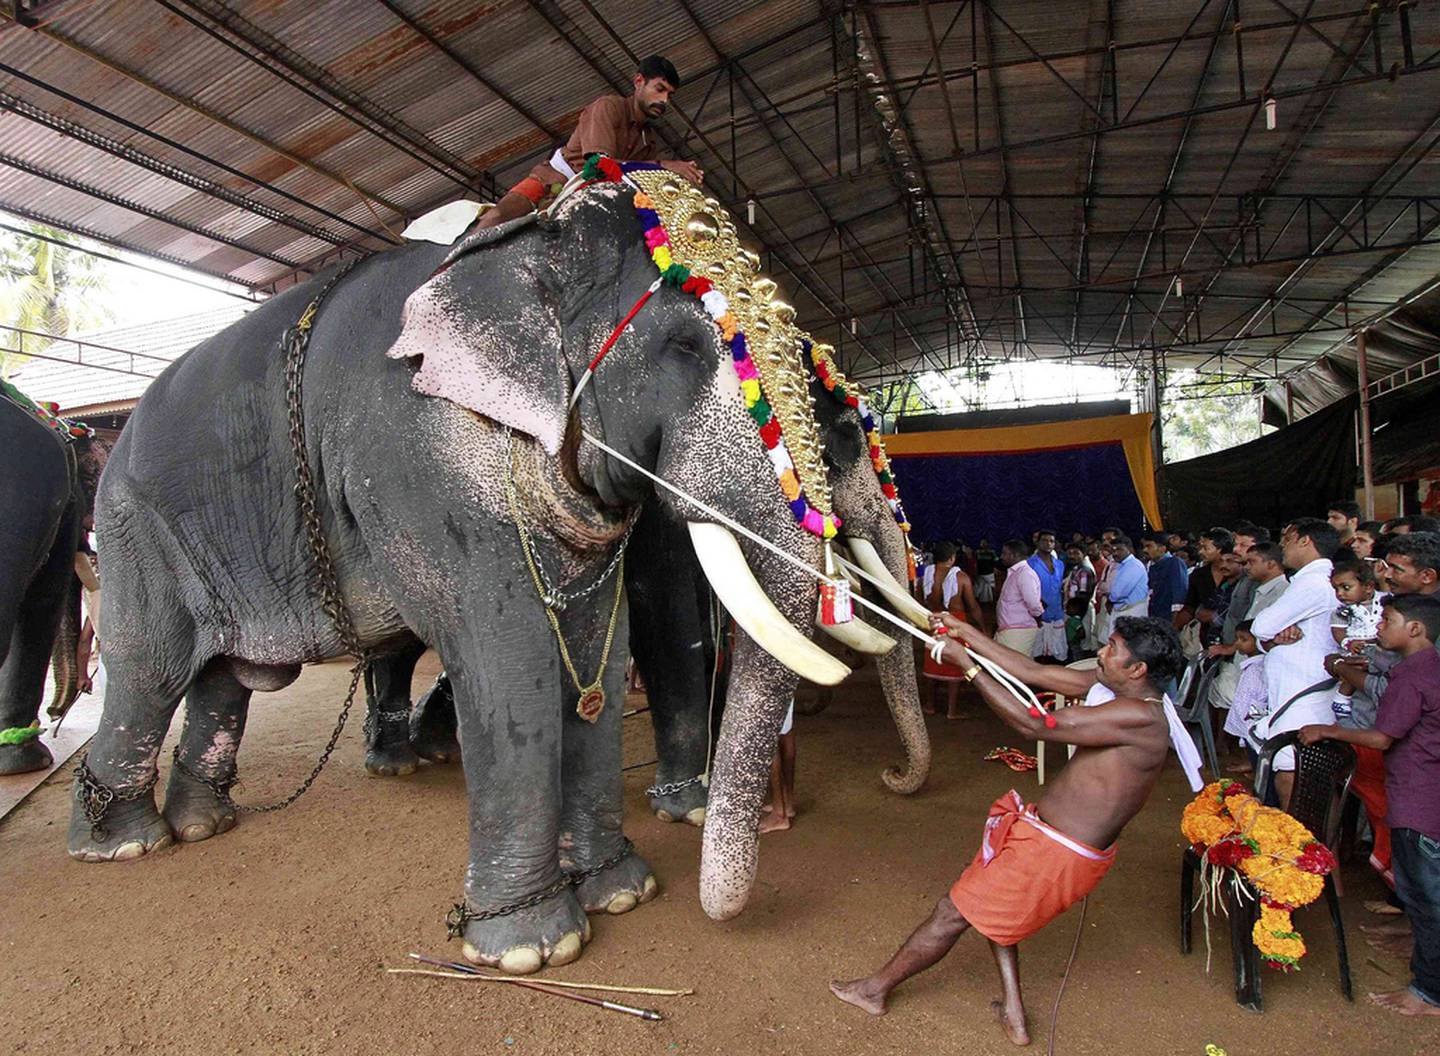 A mahout tightens a rope as he drapes a caparison on to an elephant's head during festivities marking the annual harvest festival of Onam in Kerala. Reuters